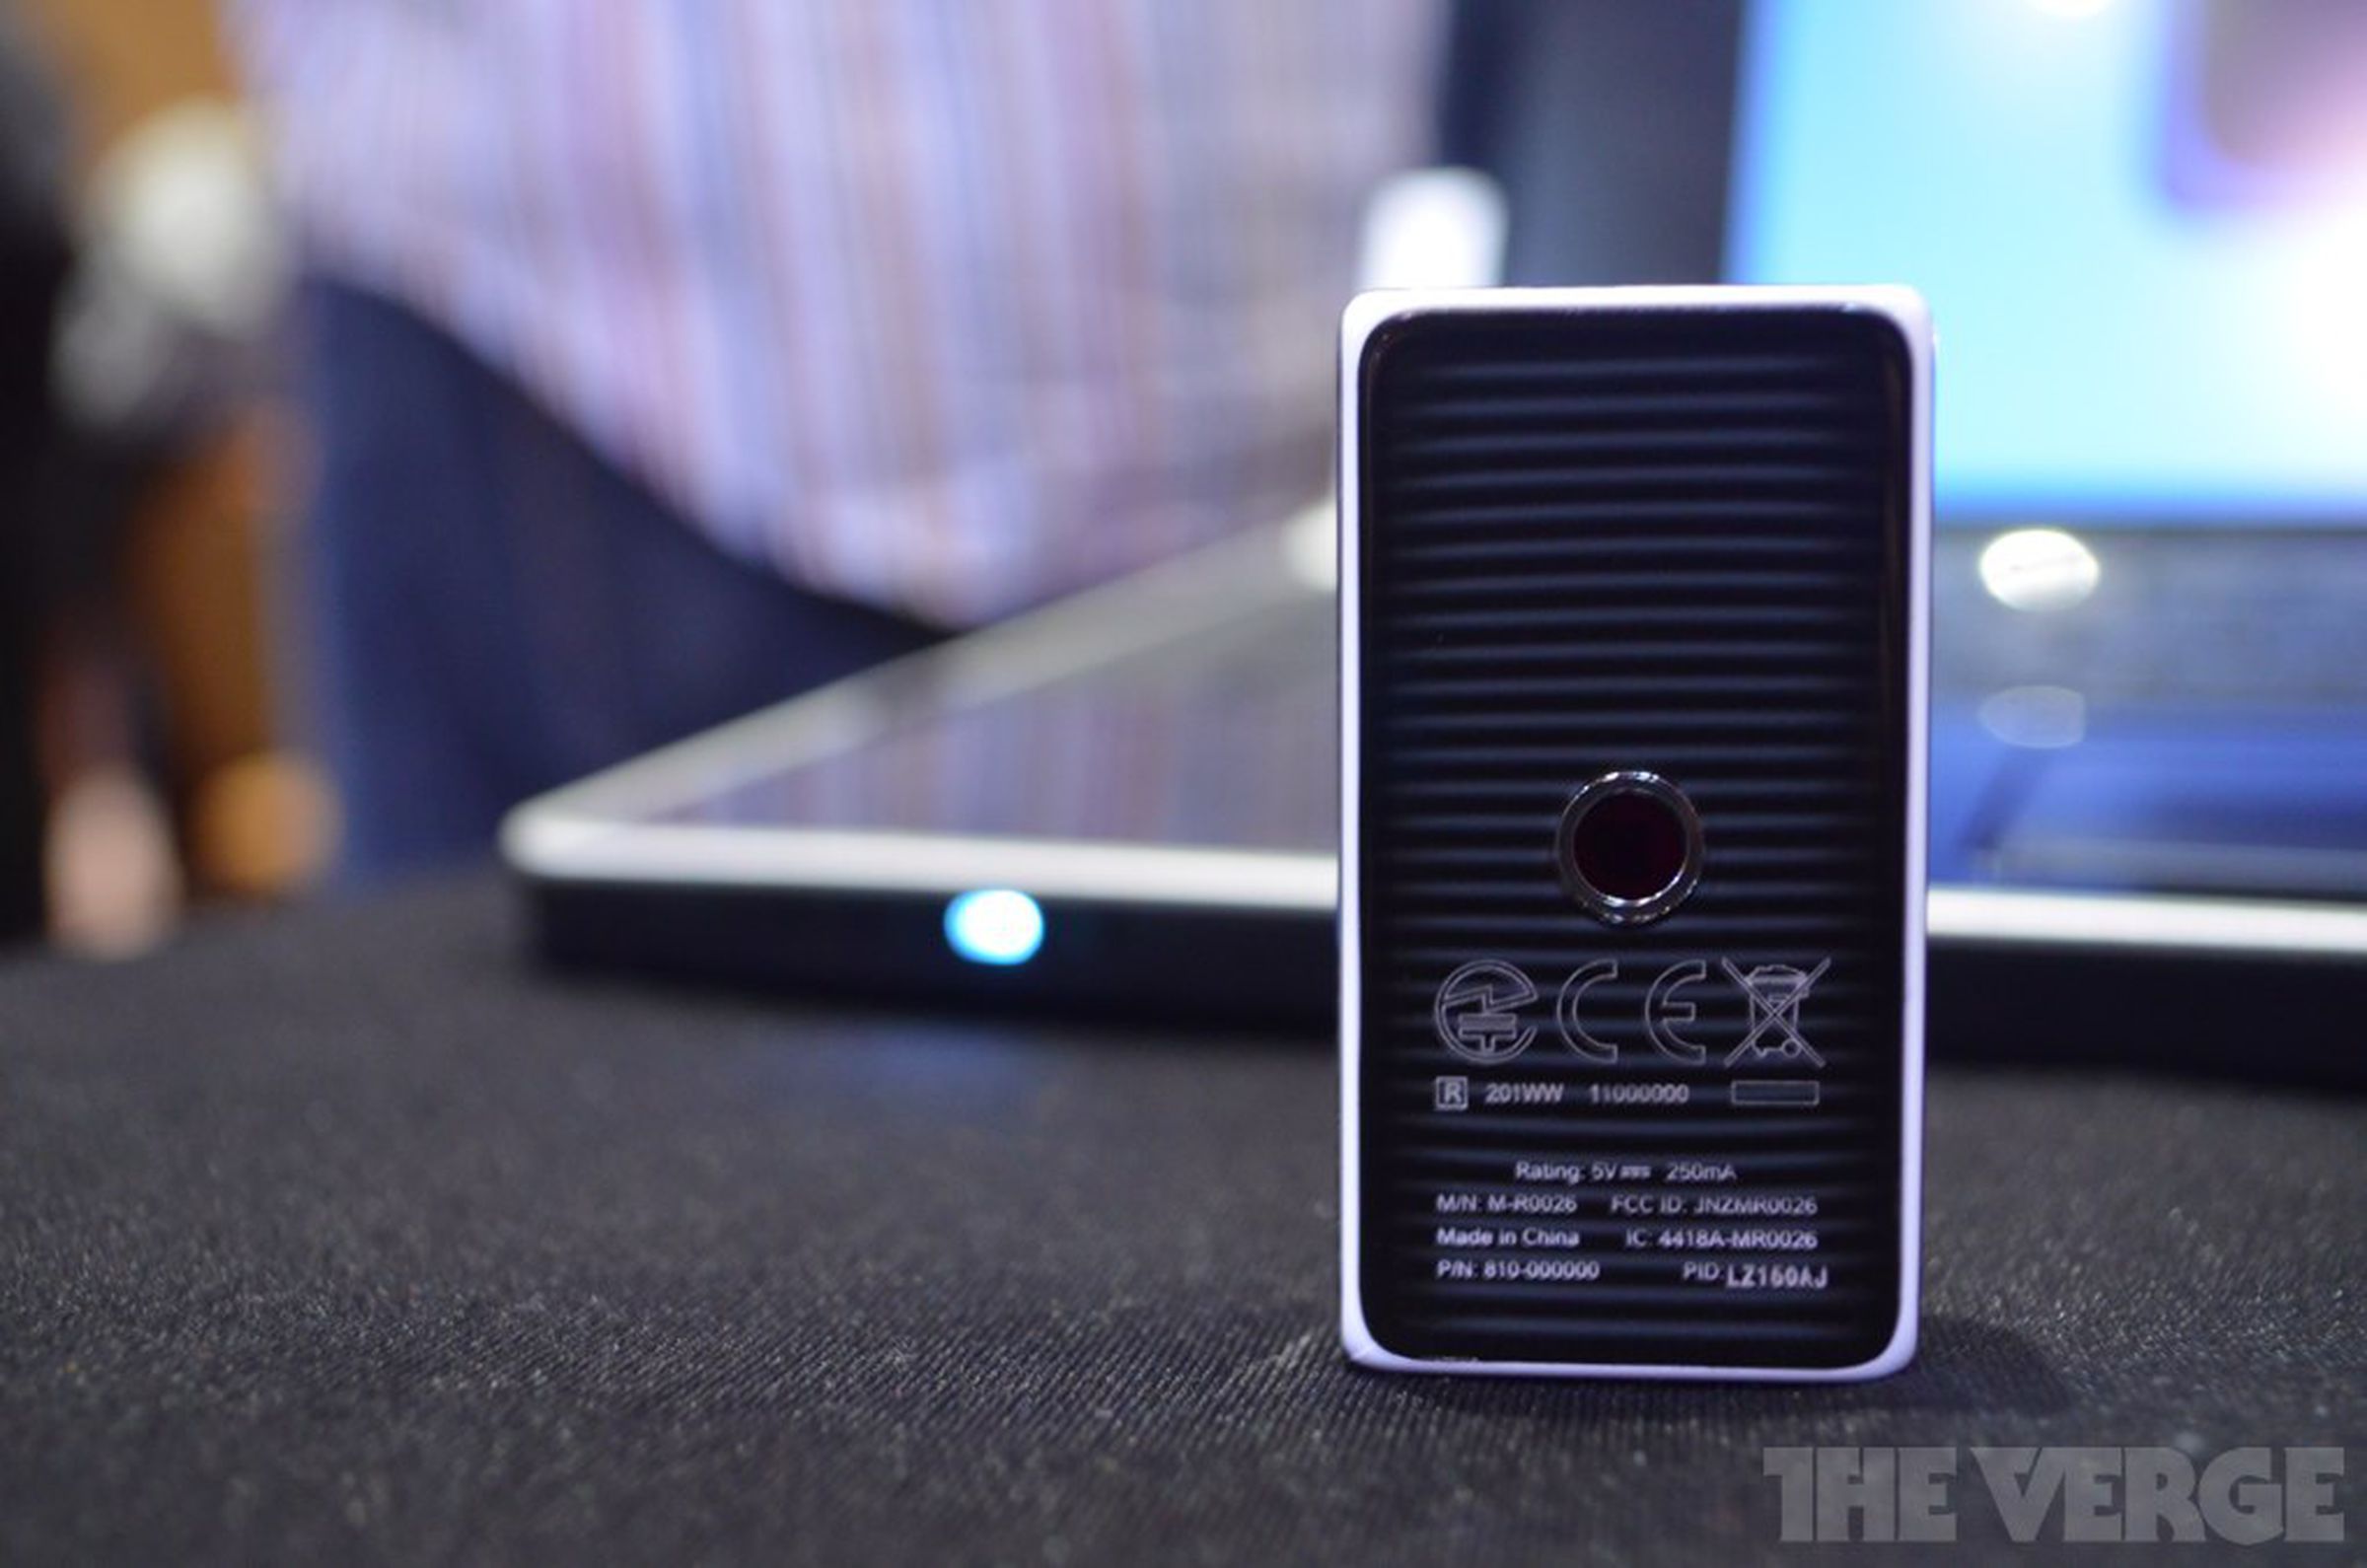 Logitech Cube hands-on pictures